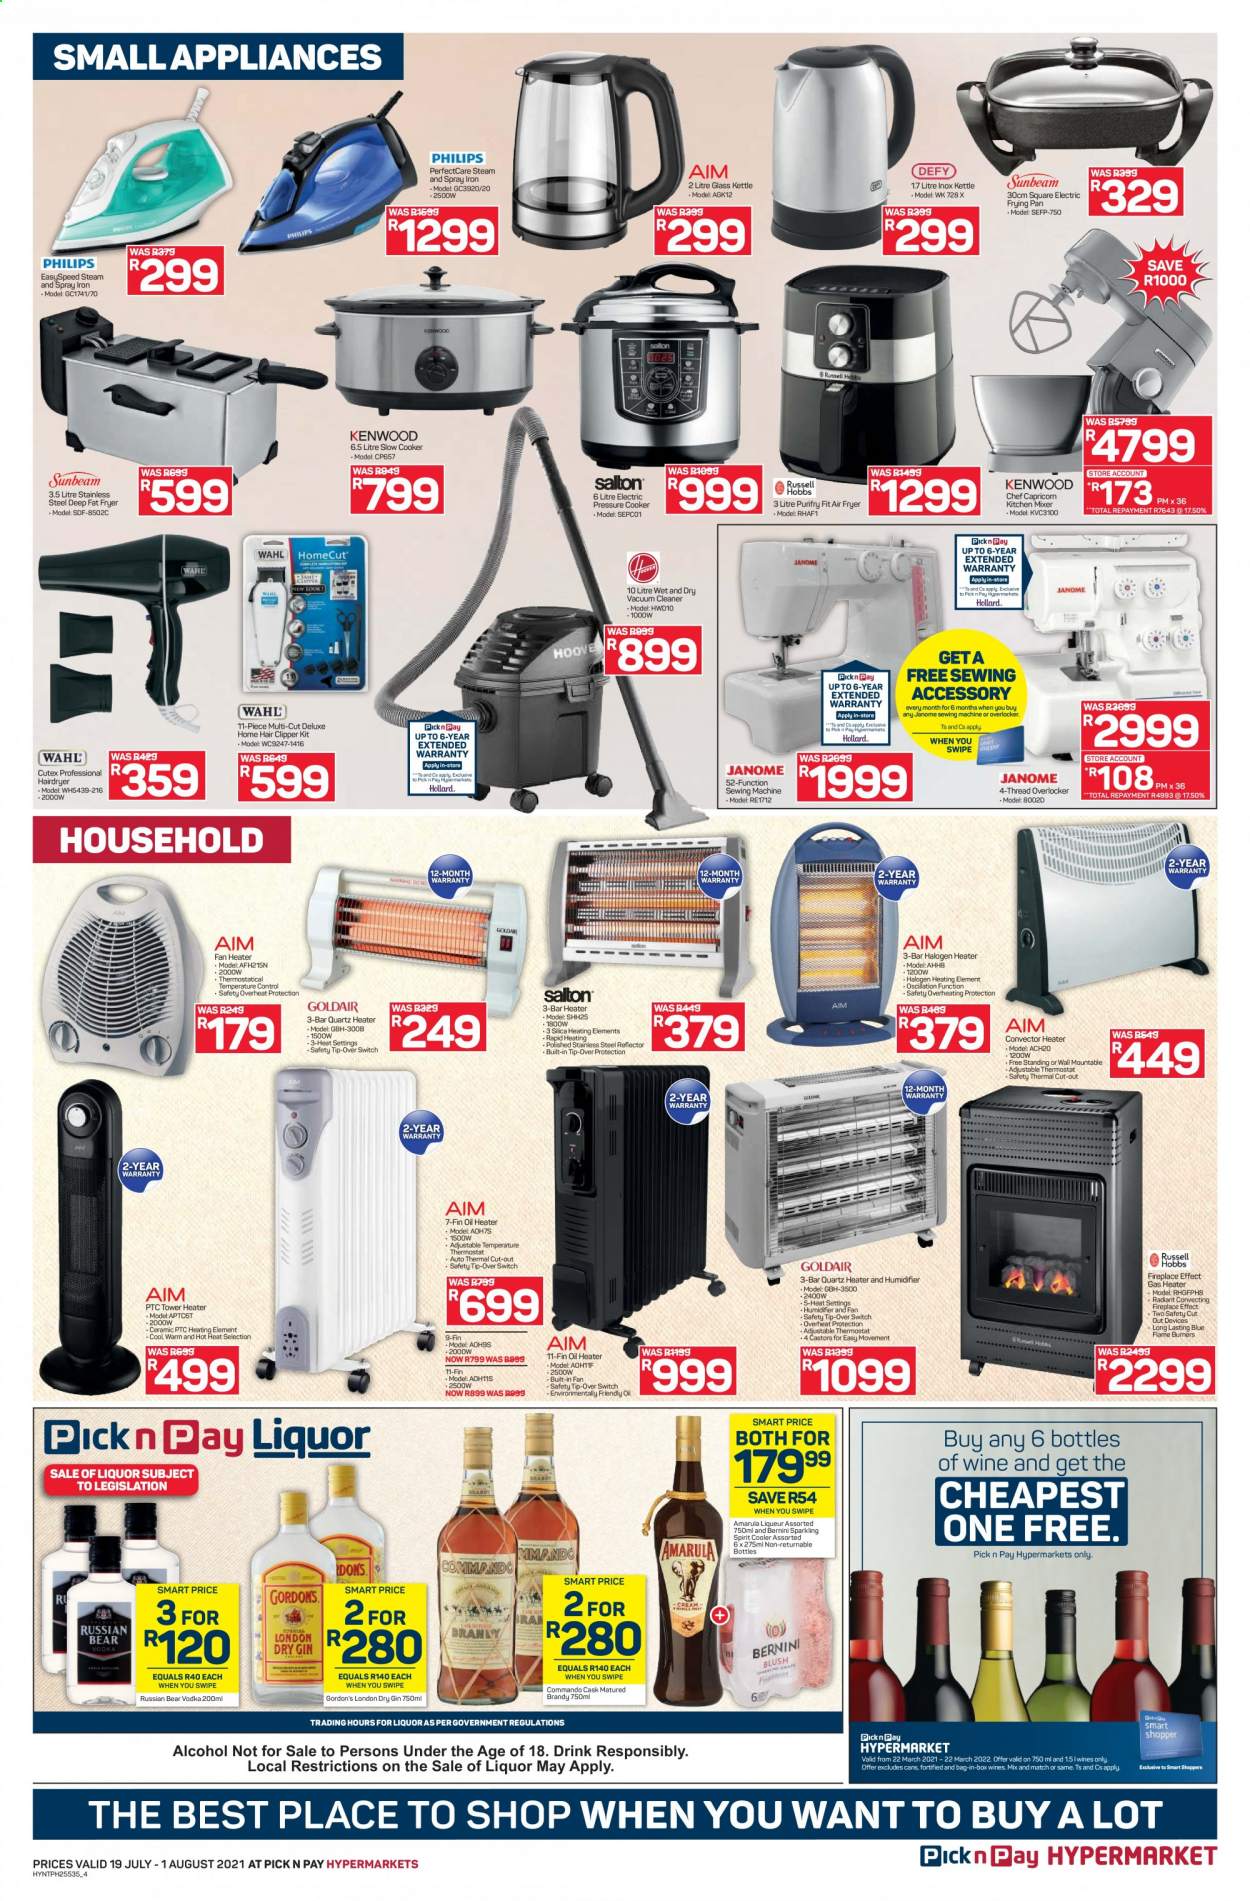 Pick n Pay specials - 07.19.2021 - 08.01.2021. 